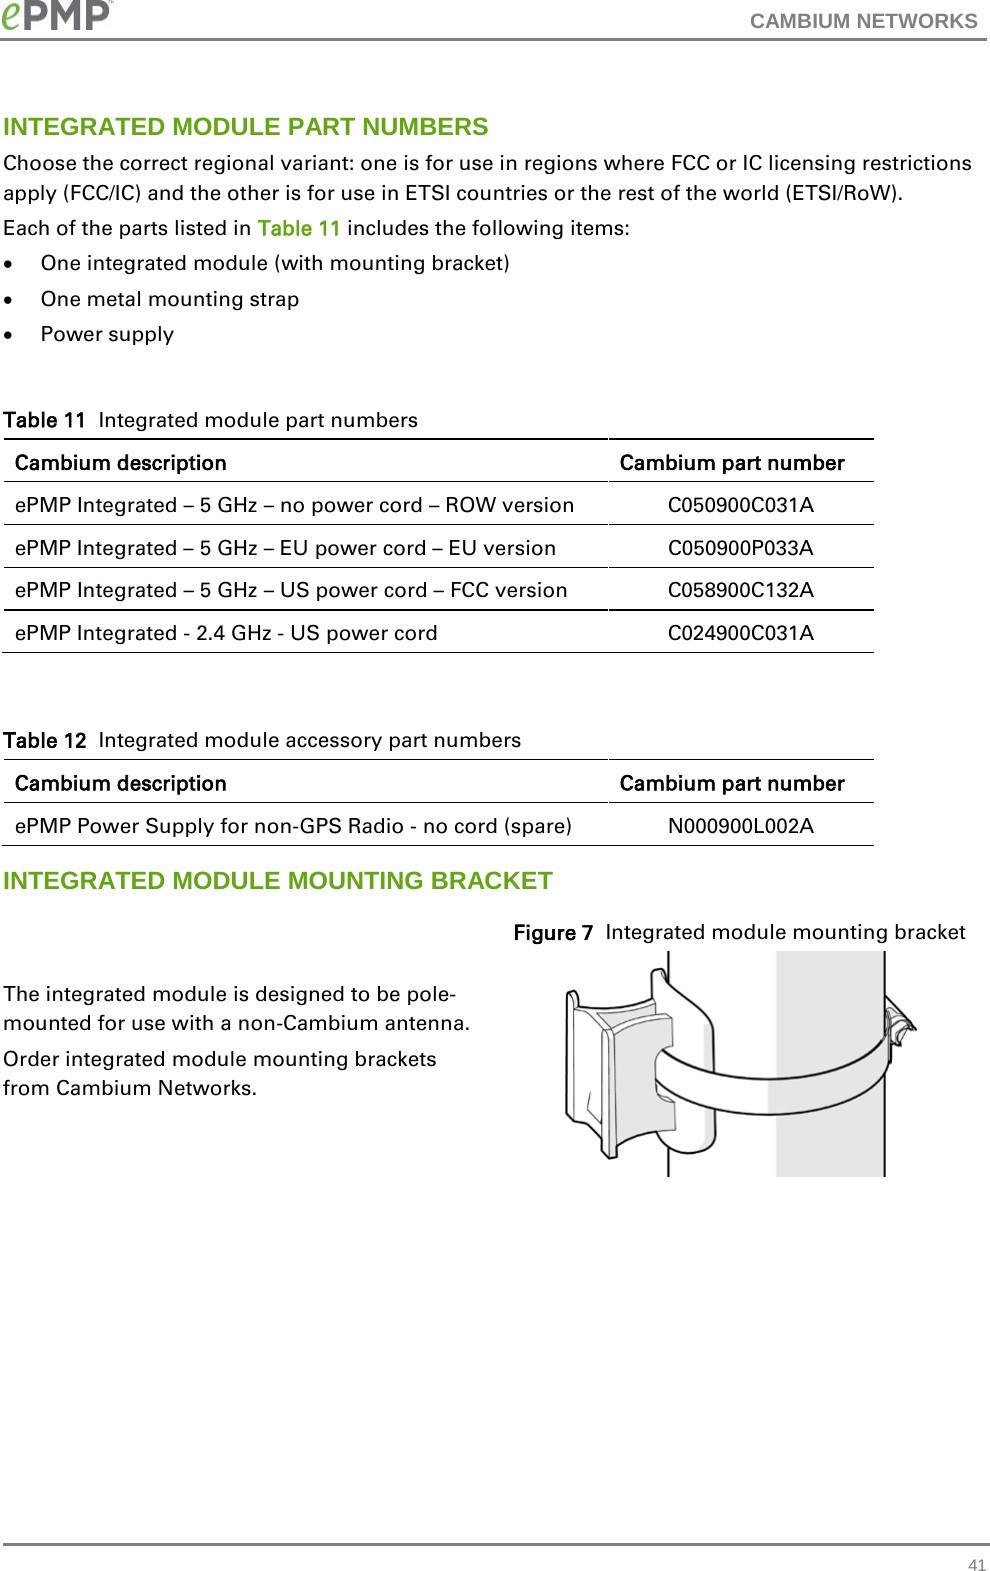 CAMBIUM NETWORKS  INTEGRATED MODULE PART NUMBERS Choose the correct regional variant: one is for use in regions where FCC or IC licensing restrictions apply (FCC/IC) and the other is for use in ETSI countries or the rest of the world (ETSI/RoW). Each of the parts listed in Table 11 includes the following items: • One integrated module (with mounting bracket) • One metal mounting strap • Power supply  Table 11  Integrated module part numbers Cambium description Cambium part number ePMP Integrated – 5 GHz – no power cord – ROW version C050900C031A ePMP Integrated – 5 GHz – EU power cord – EU version C050900P033A ePMP Integrated – 5 GHz – US power cord – FCC version C058900C132A ePMP Integrated - 2.4 GHz - US power cord C024900C031A  Table 12  Integrated module accessory part numbers Cambium description Cambium part number ePMP Power Supply for non-GPS Radio - no cord (spare) N000900L002A INTEGRATED MODULE MOUNTING BRACKET The integrated module is designed to be pole-mounted for use with a non-Cambium antenna.   Order integrated module mounting brackets from Cambium Networks.  Figure 7  Integrated module mounting bracket    41 